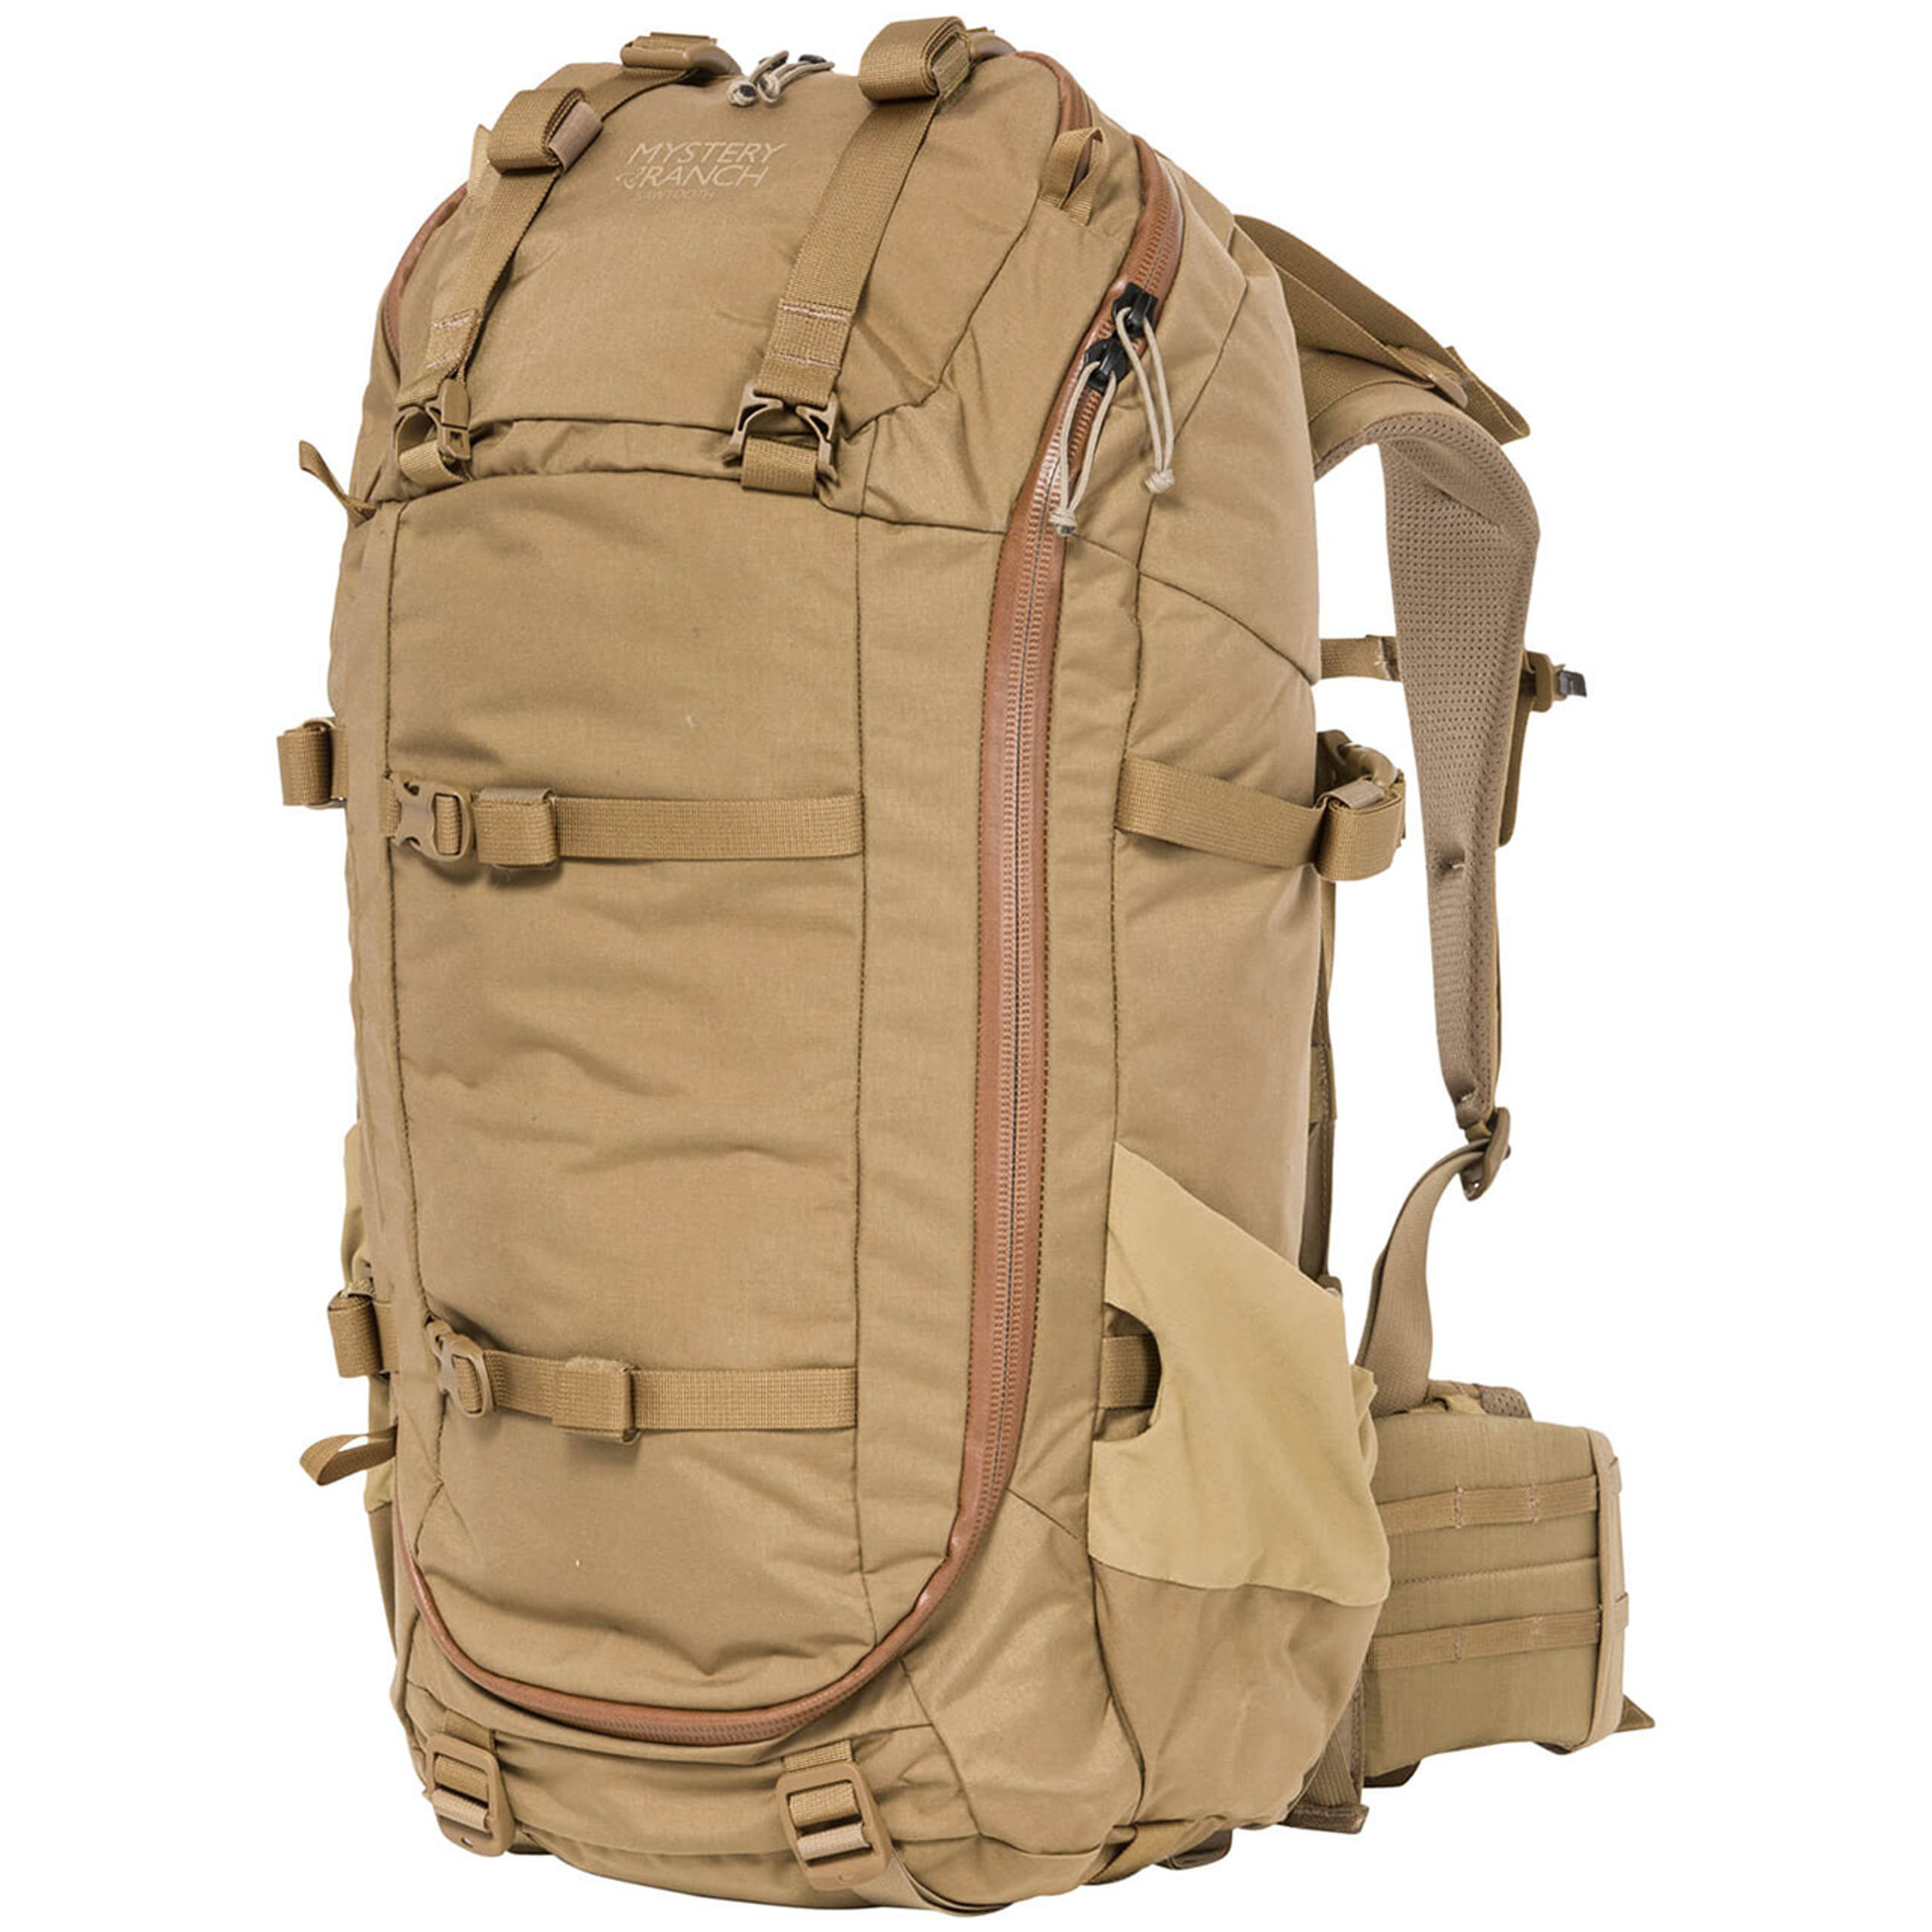 Mystery Ranch Sawtooth 45 Backpack - Coyote | CSC - Canada's Gun Shop